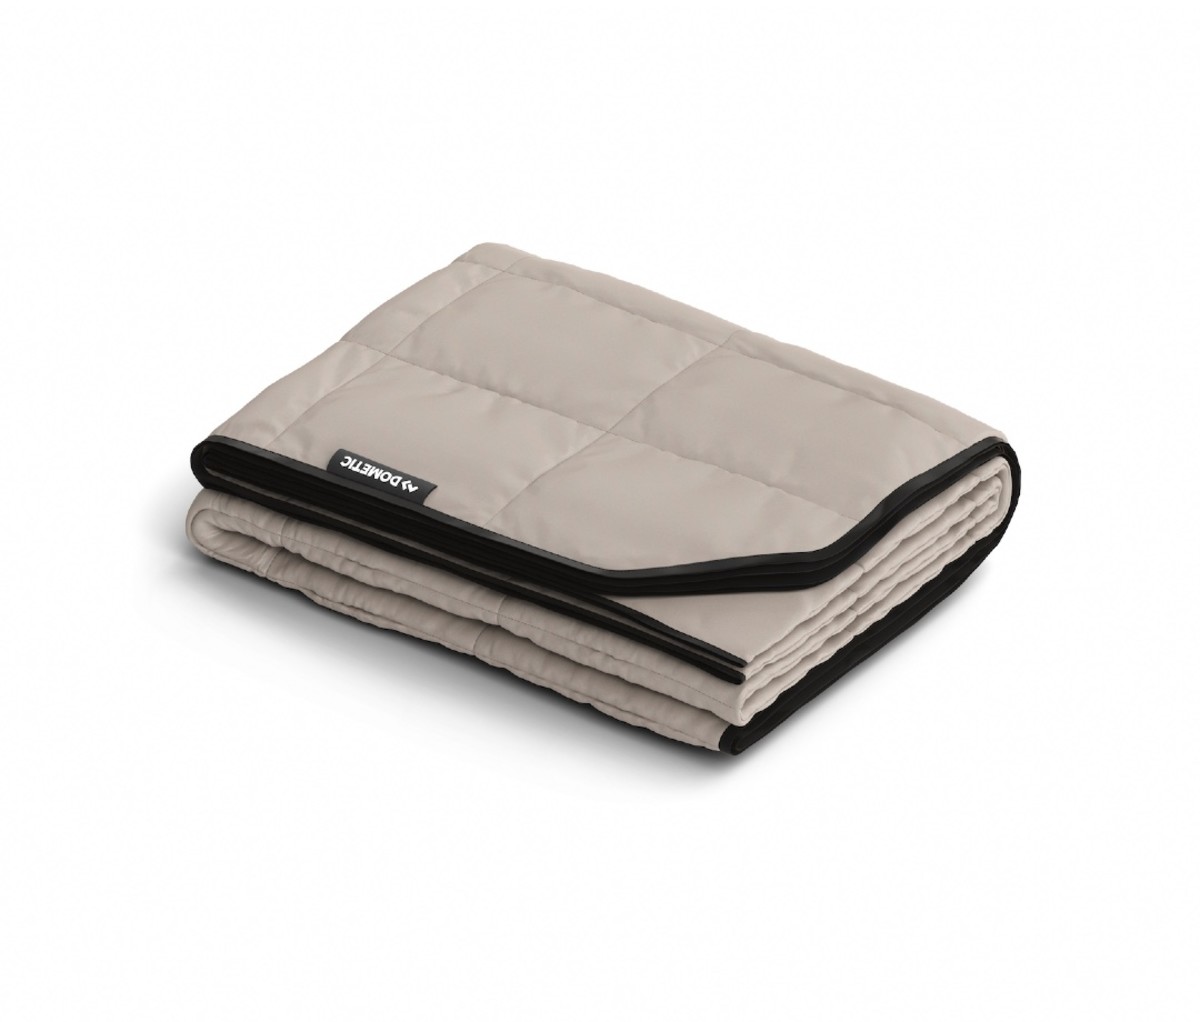 Take along the Dometic GO Camp Blanket on your next outdoor excursion to keep warm on cool nights.